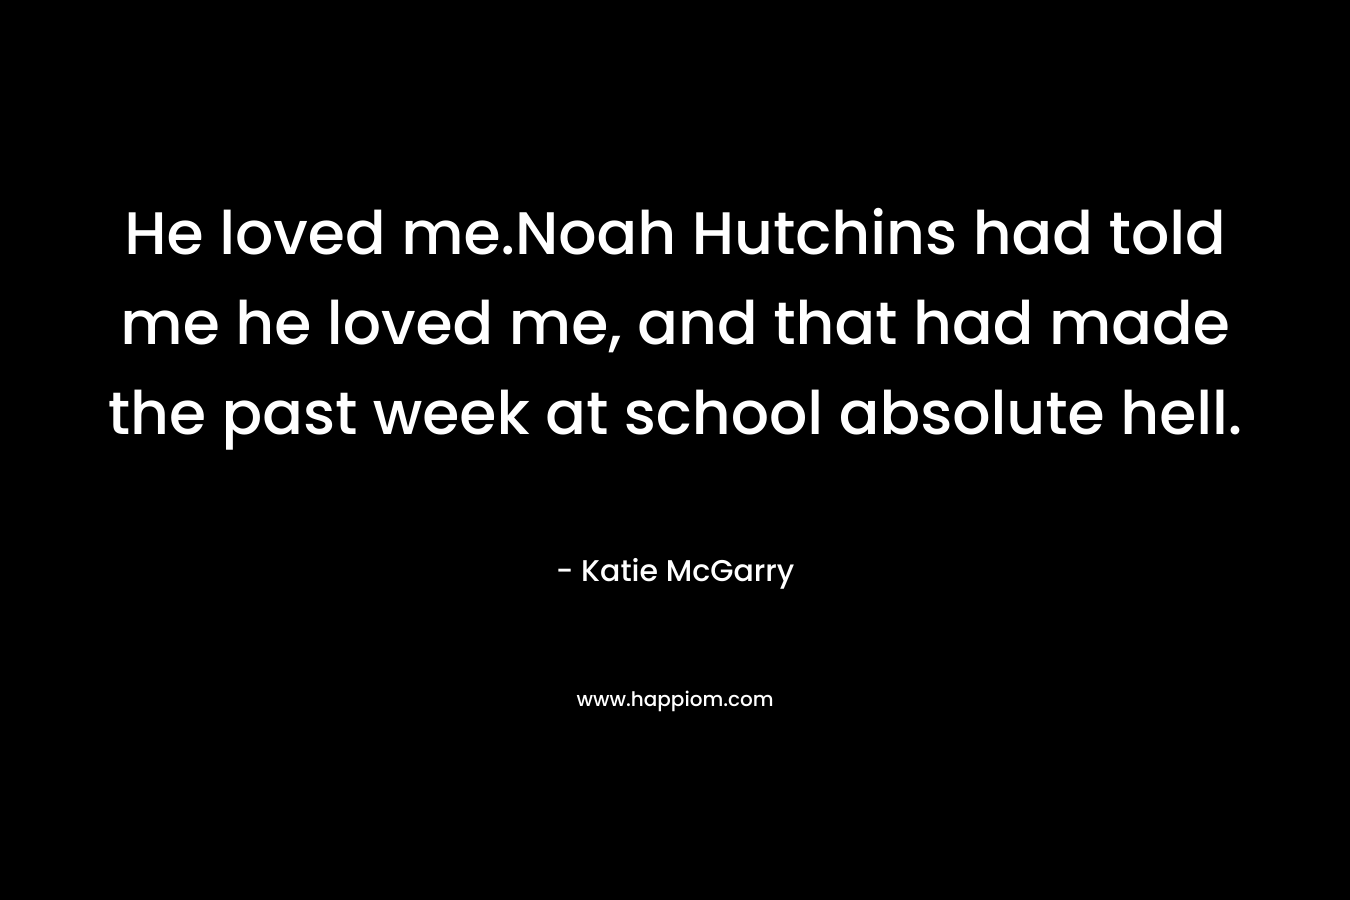 He loved me.Noah Hutchins had told me he loved me, and that had made the past week at school absolute hell.